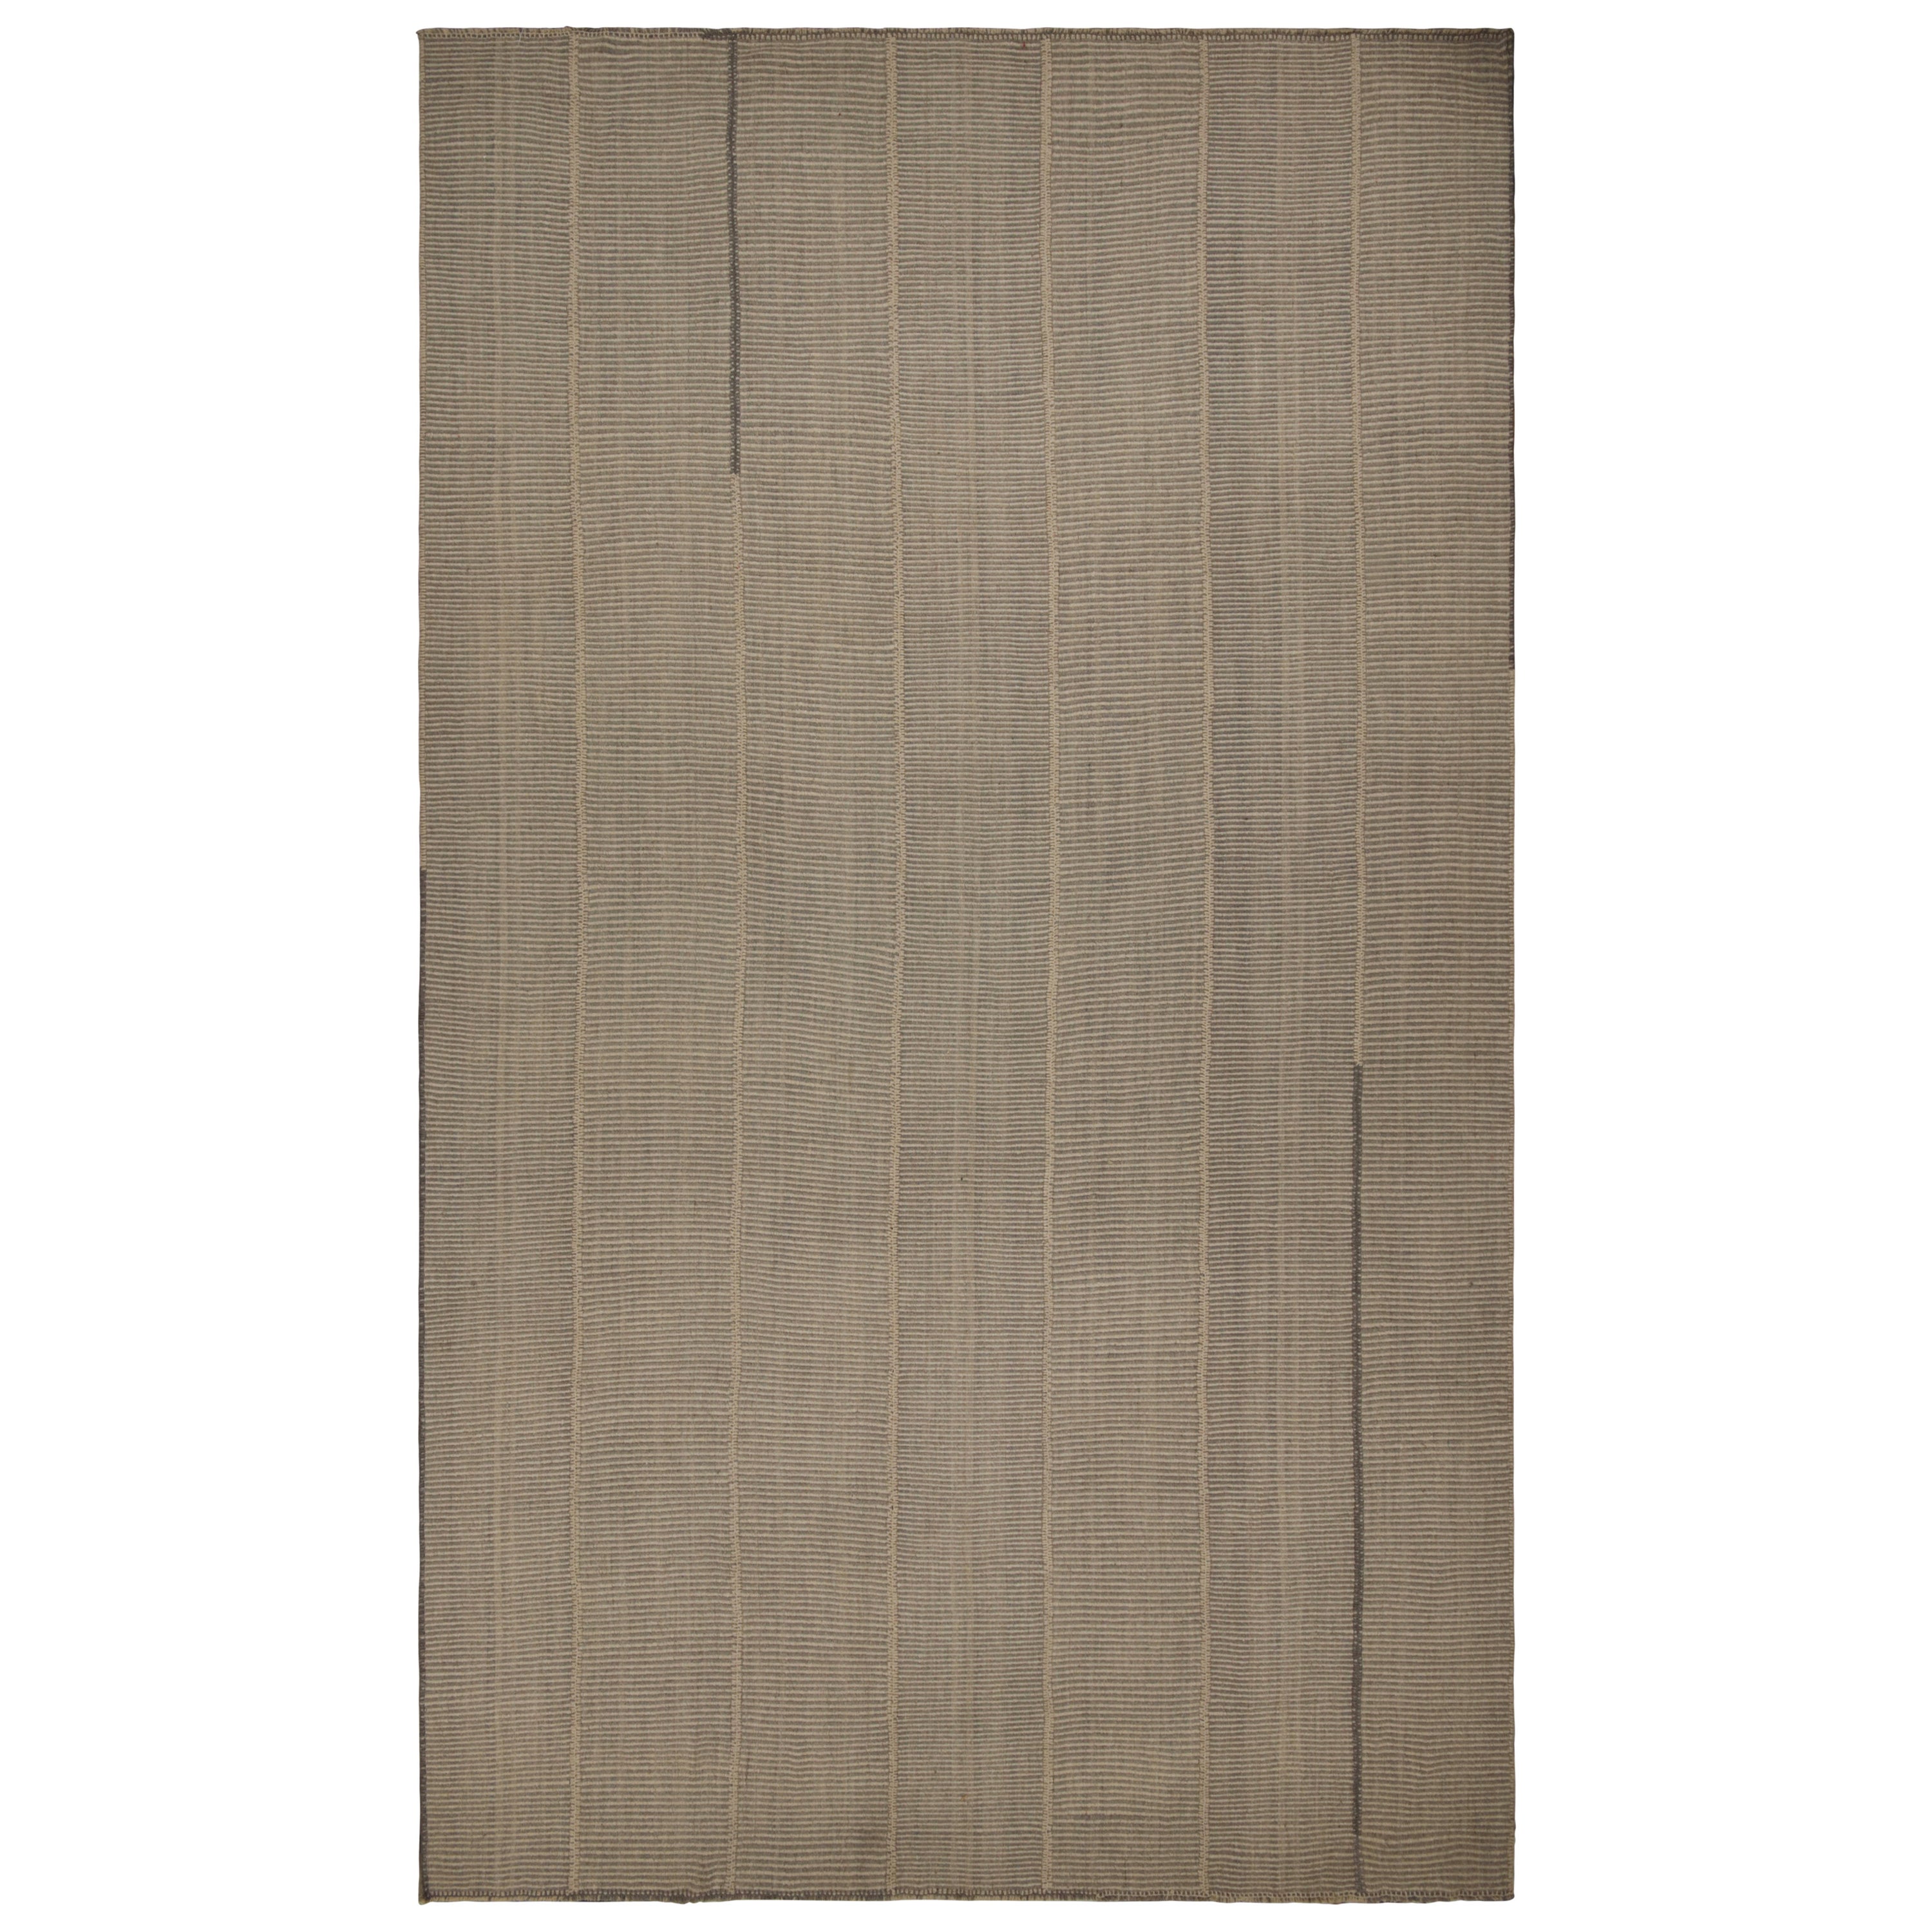 Rug & Kilim’s Contemporary Kilim in Beige and Brown Accents